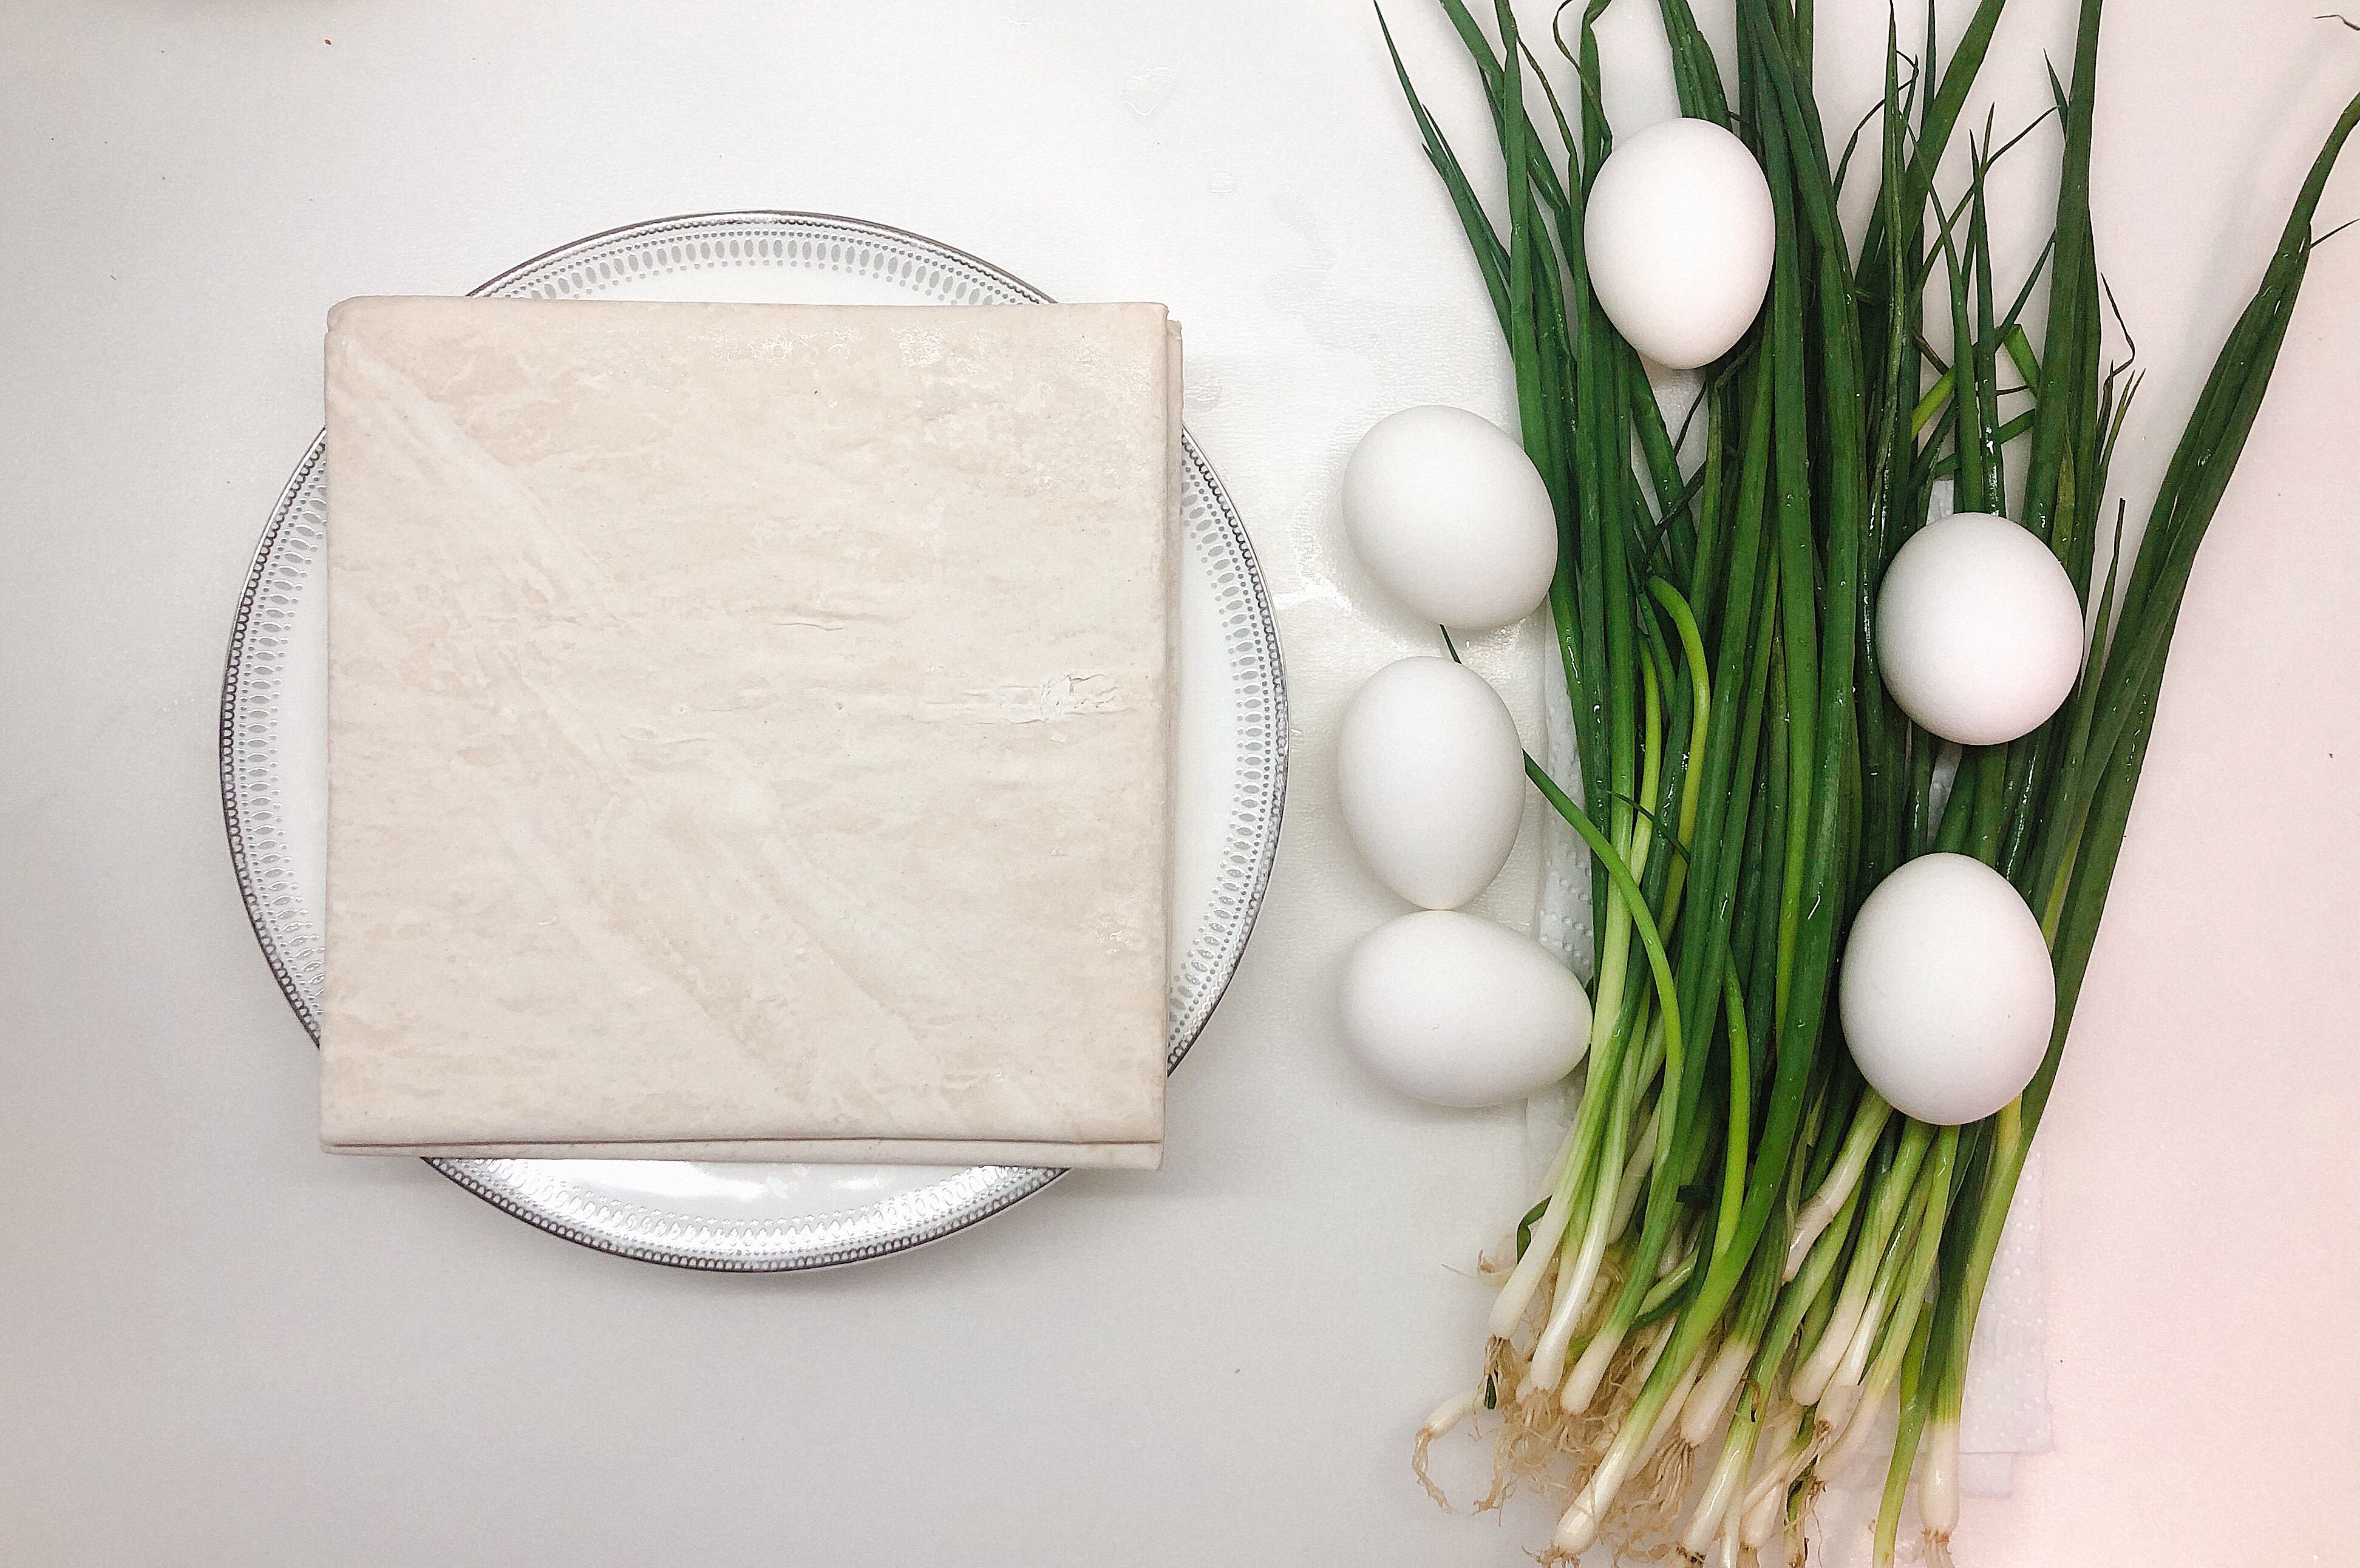 Ingredients for pie with spring onion and eggs